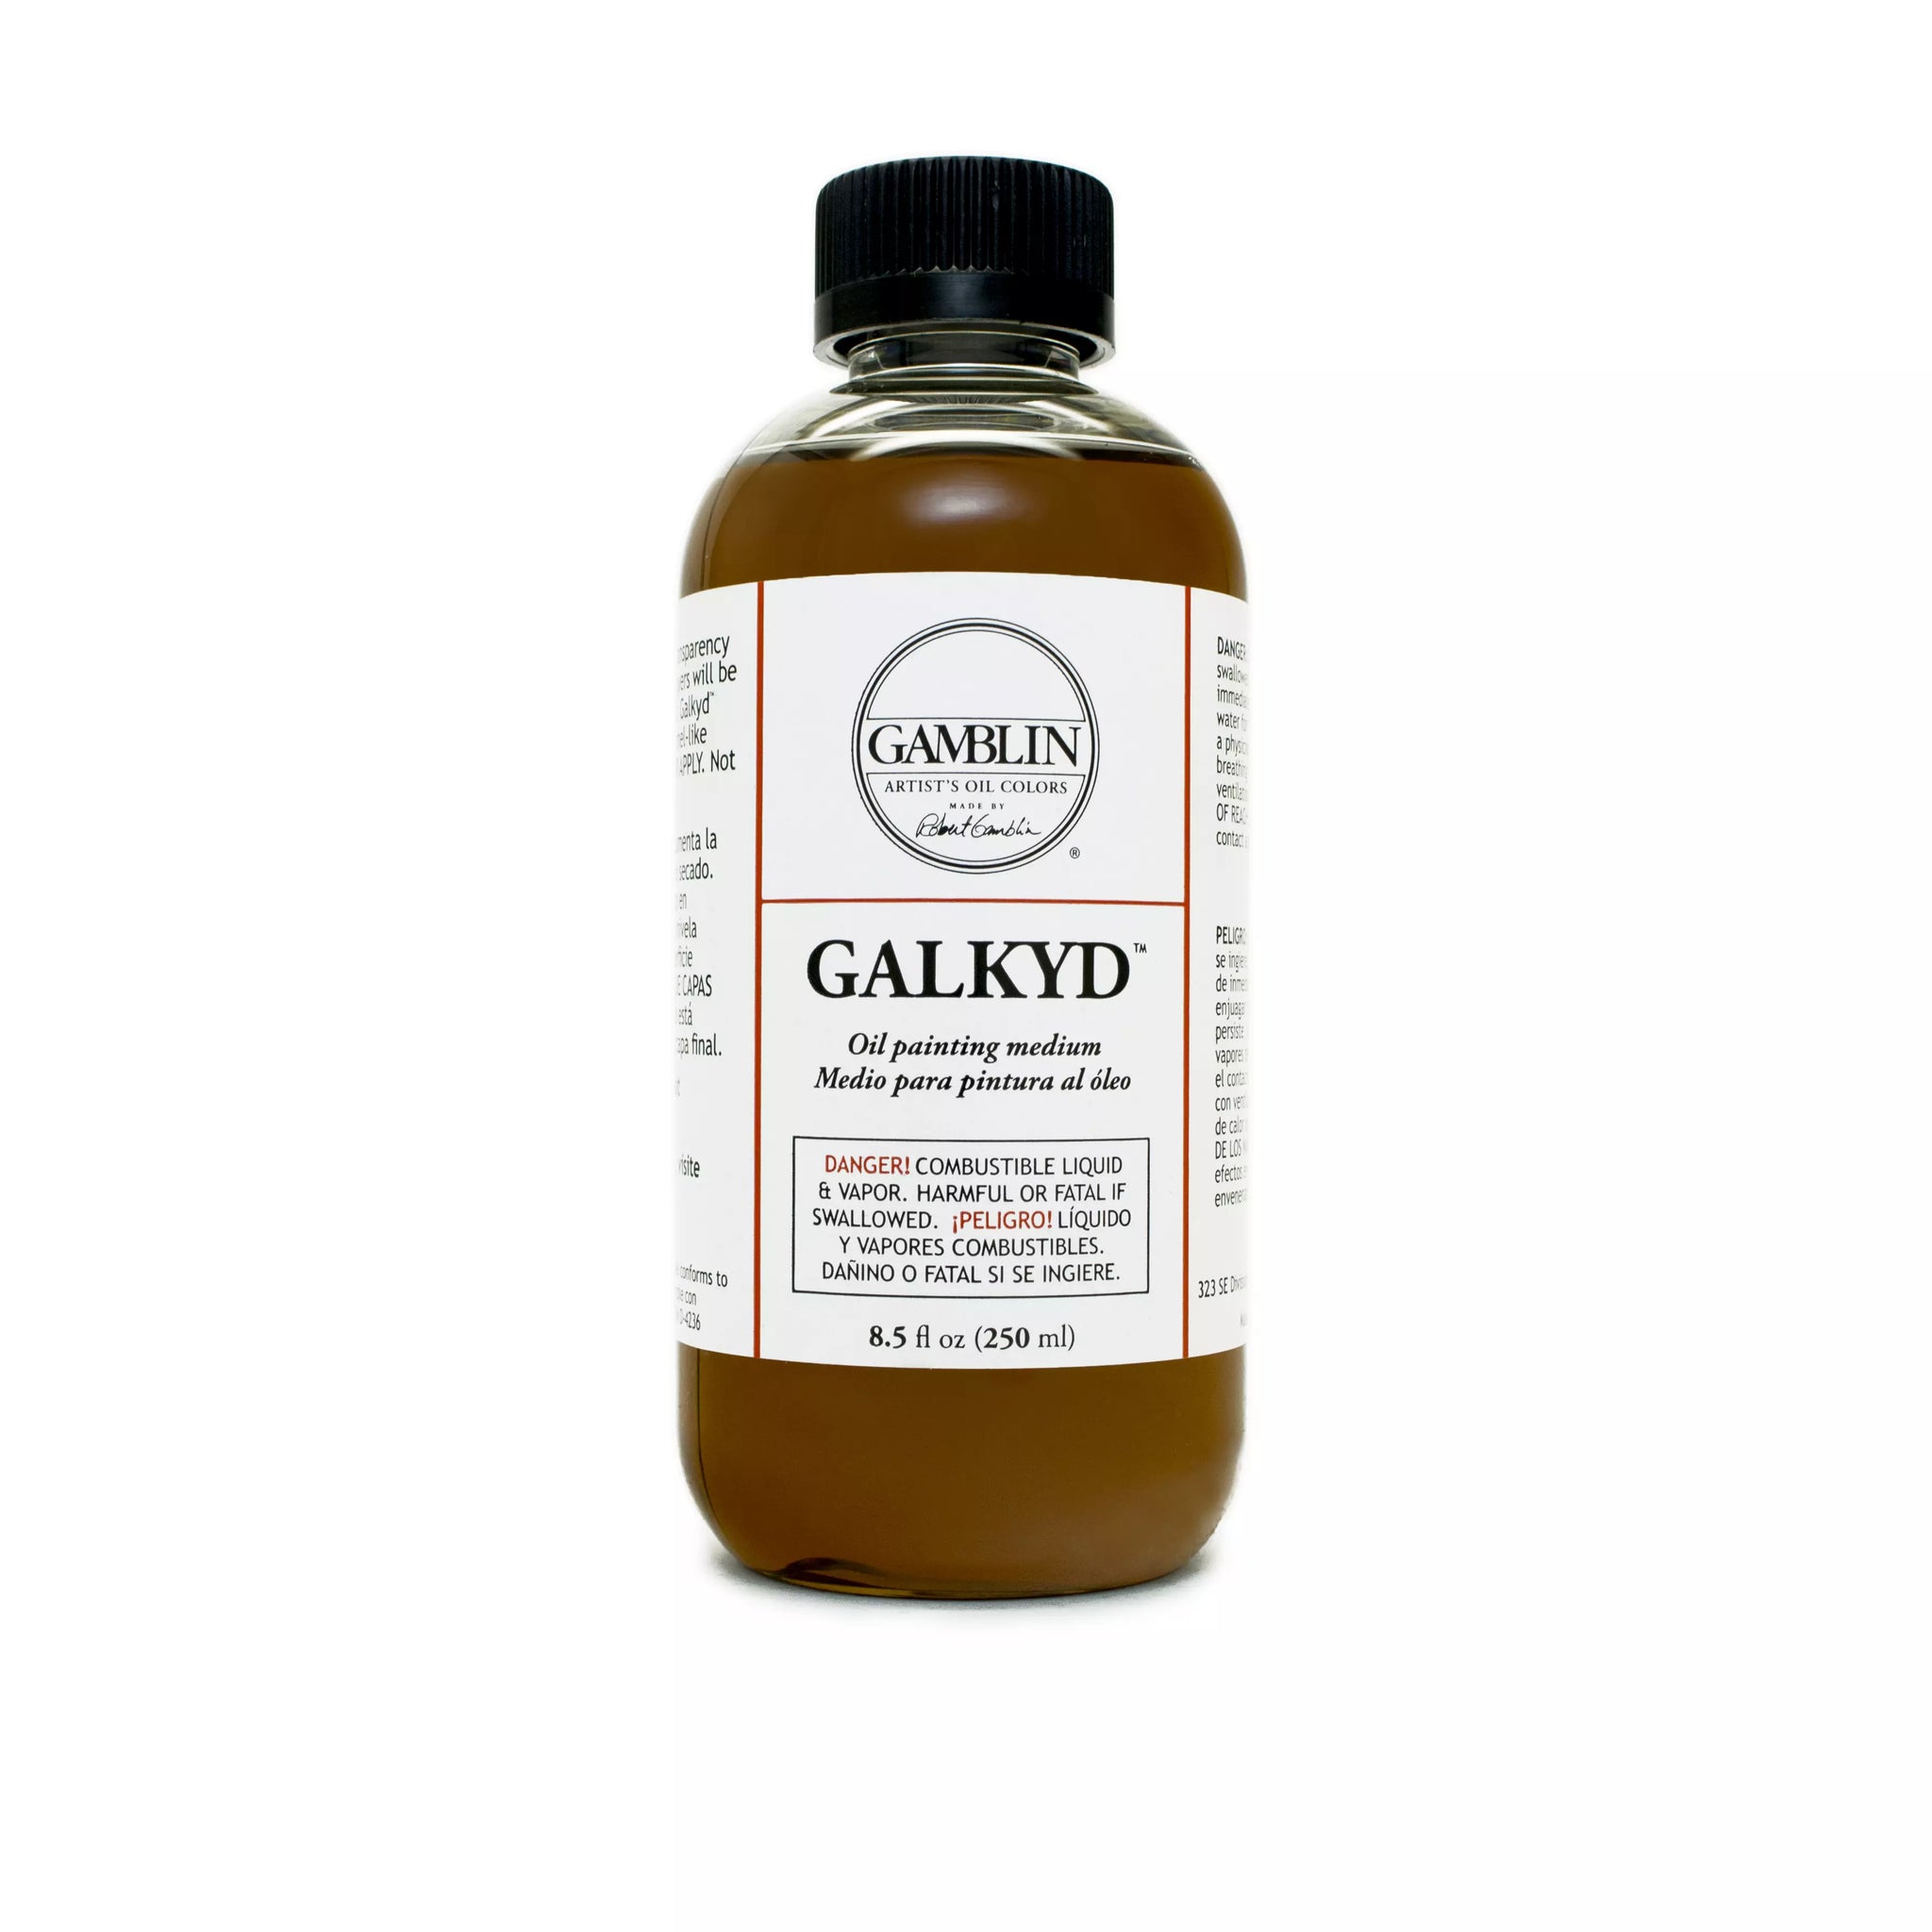 Gamblin Artists Oils, Mediums, Galkyd - Melbourne Etching and Printmaking Supplies 